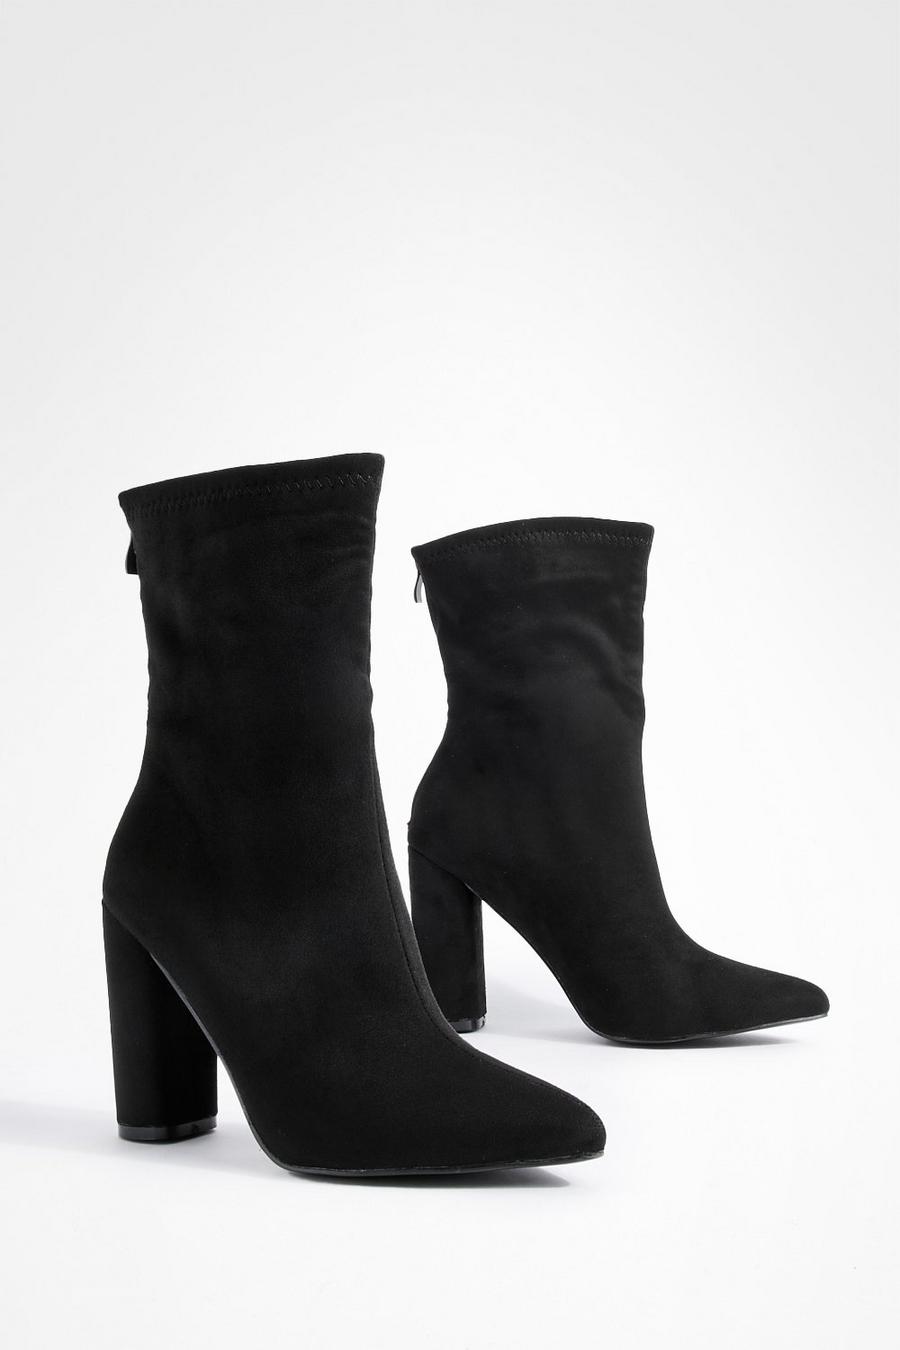 BELLE RUCHED SLOUCH BLOCK HIGH HEEL SOCK ANKLE BOOTS IN BLACK PU